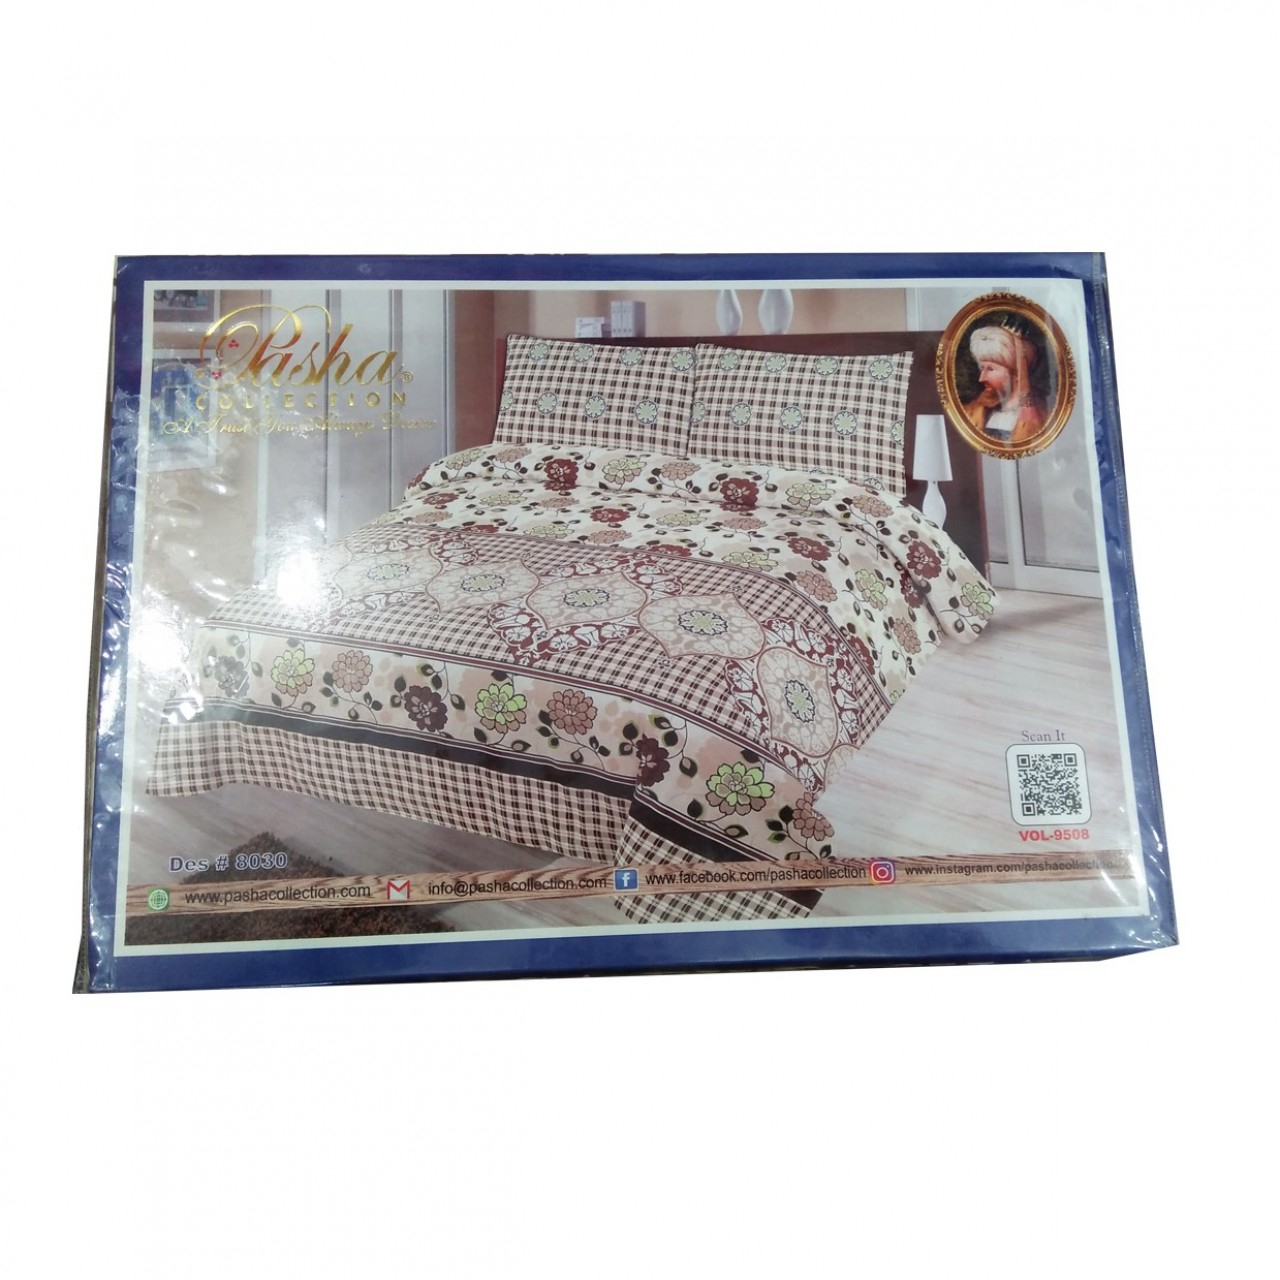 Pasha Collection Double Virsa Bed Sheet Des-8030 With 2 Pillow Covers